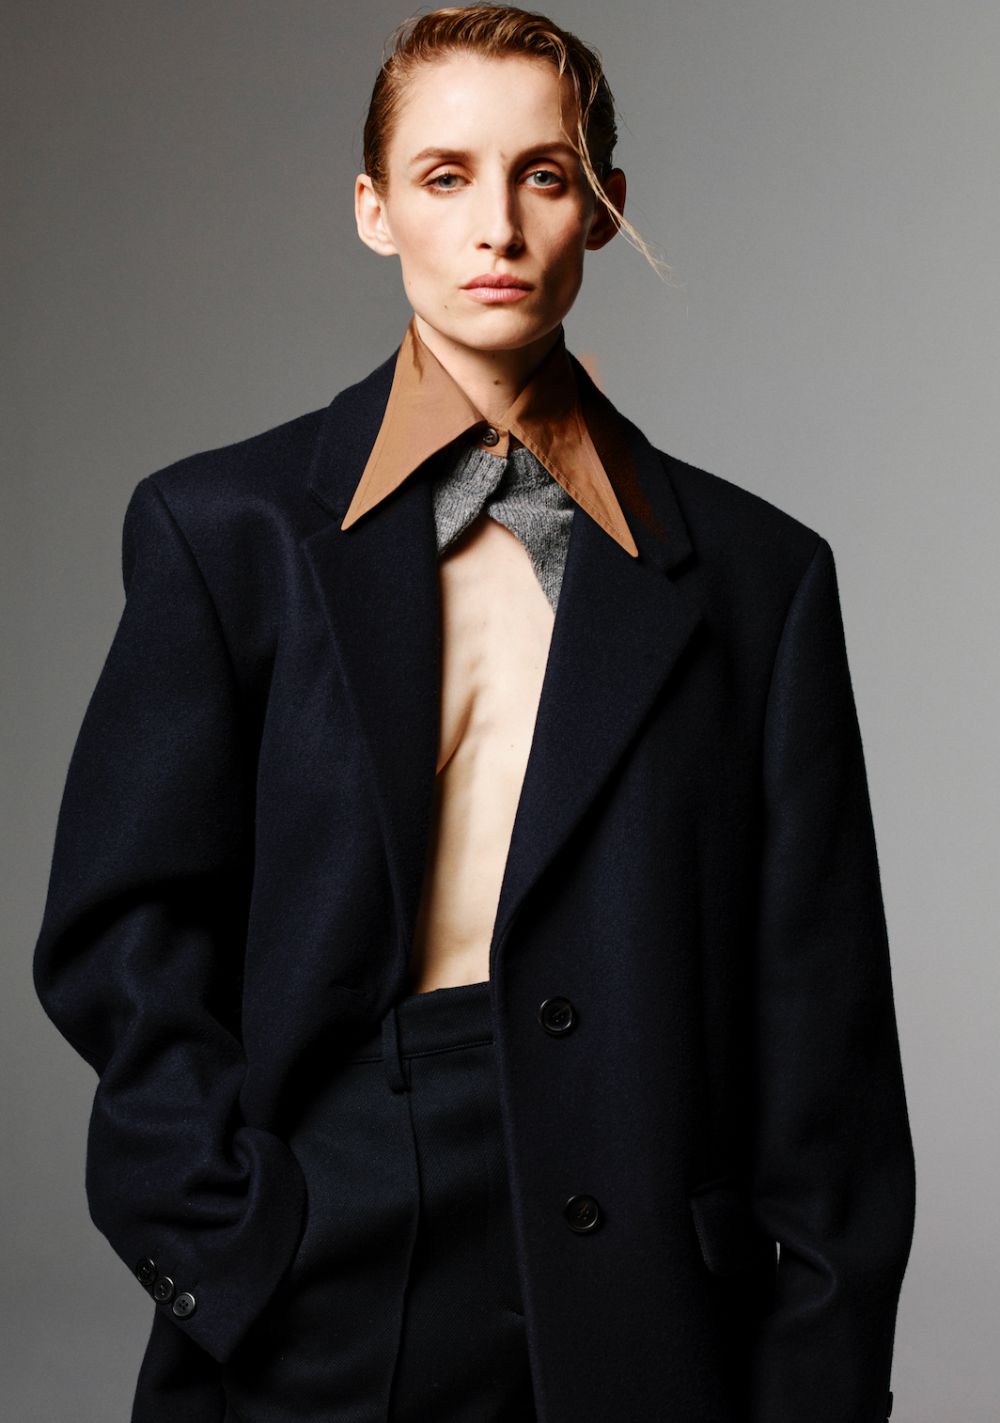 Gem Refoufi by Anthony Seklaoui for Luncheon Magazine Fall-Winter 2023, wearing Prada Navy Wool Coat with a point collar and grey knitted panel